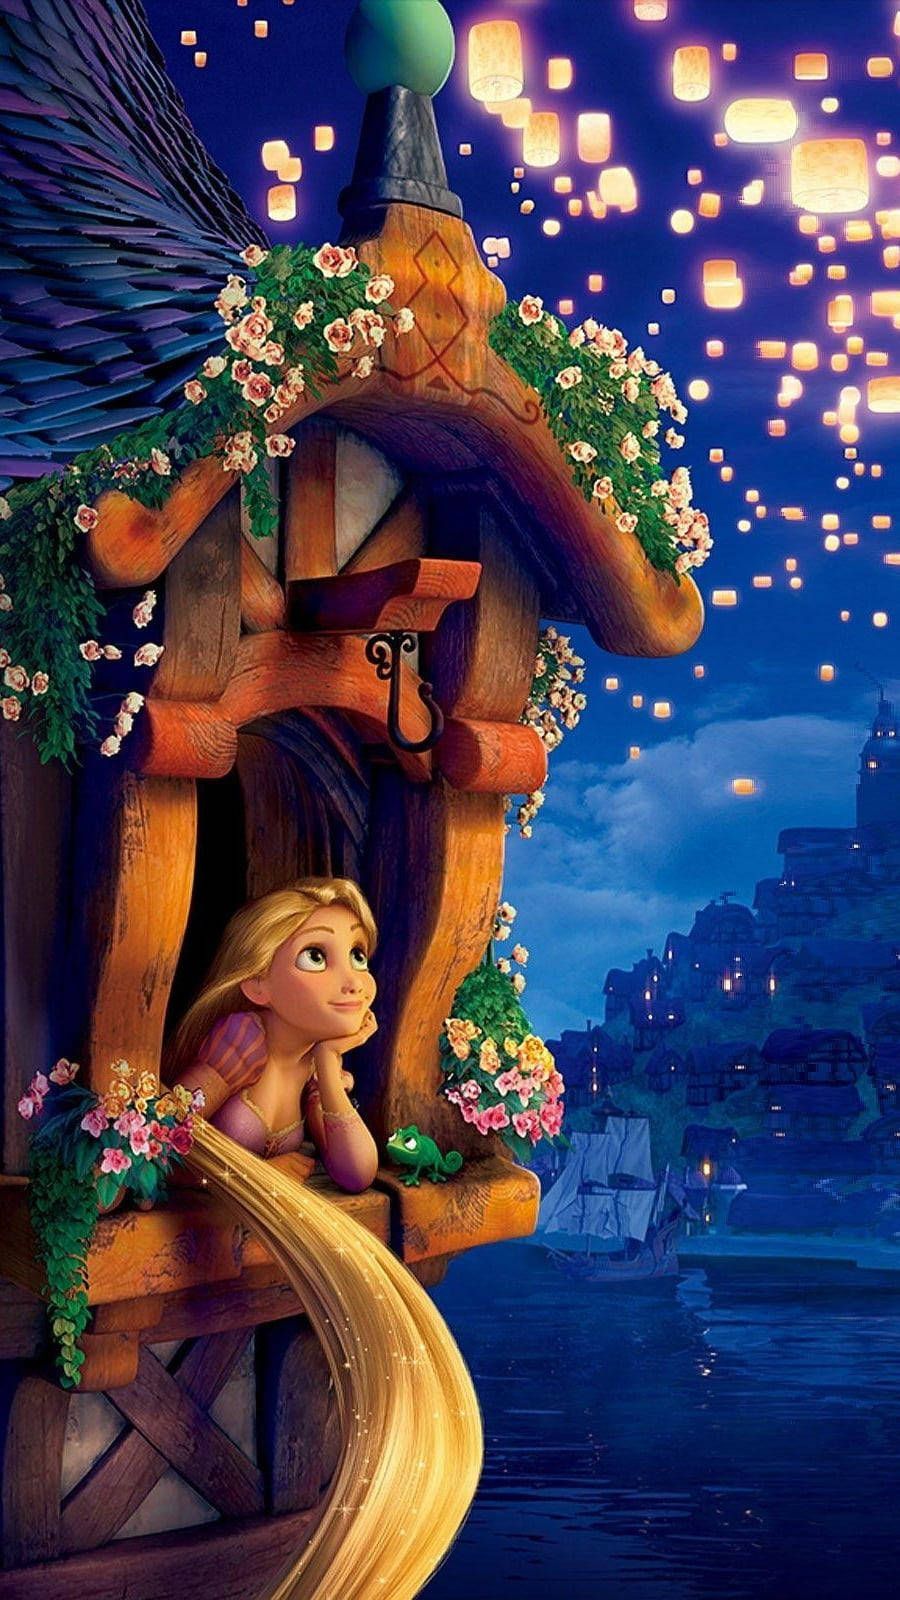 Tangled wallpaper for iPhone with high-resolution 1080x1920 pixel. You can use this wallpaper for your iPhone 5, 6, 7, 8, X, XS, XR backgrounds, Mobile Screensaver, or iPad Lock Screen - Rapunzel